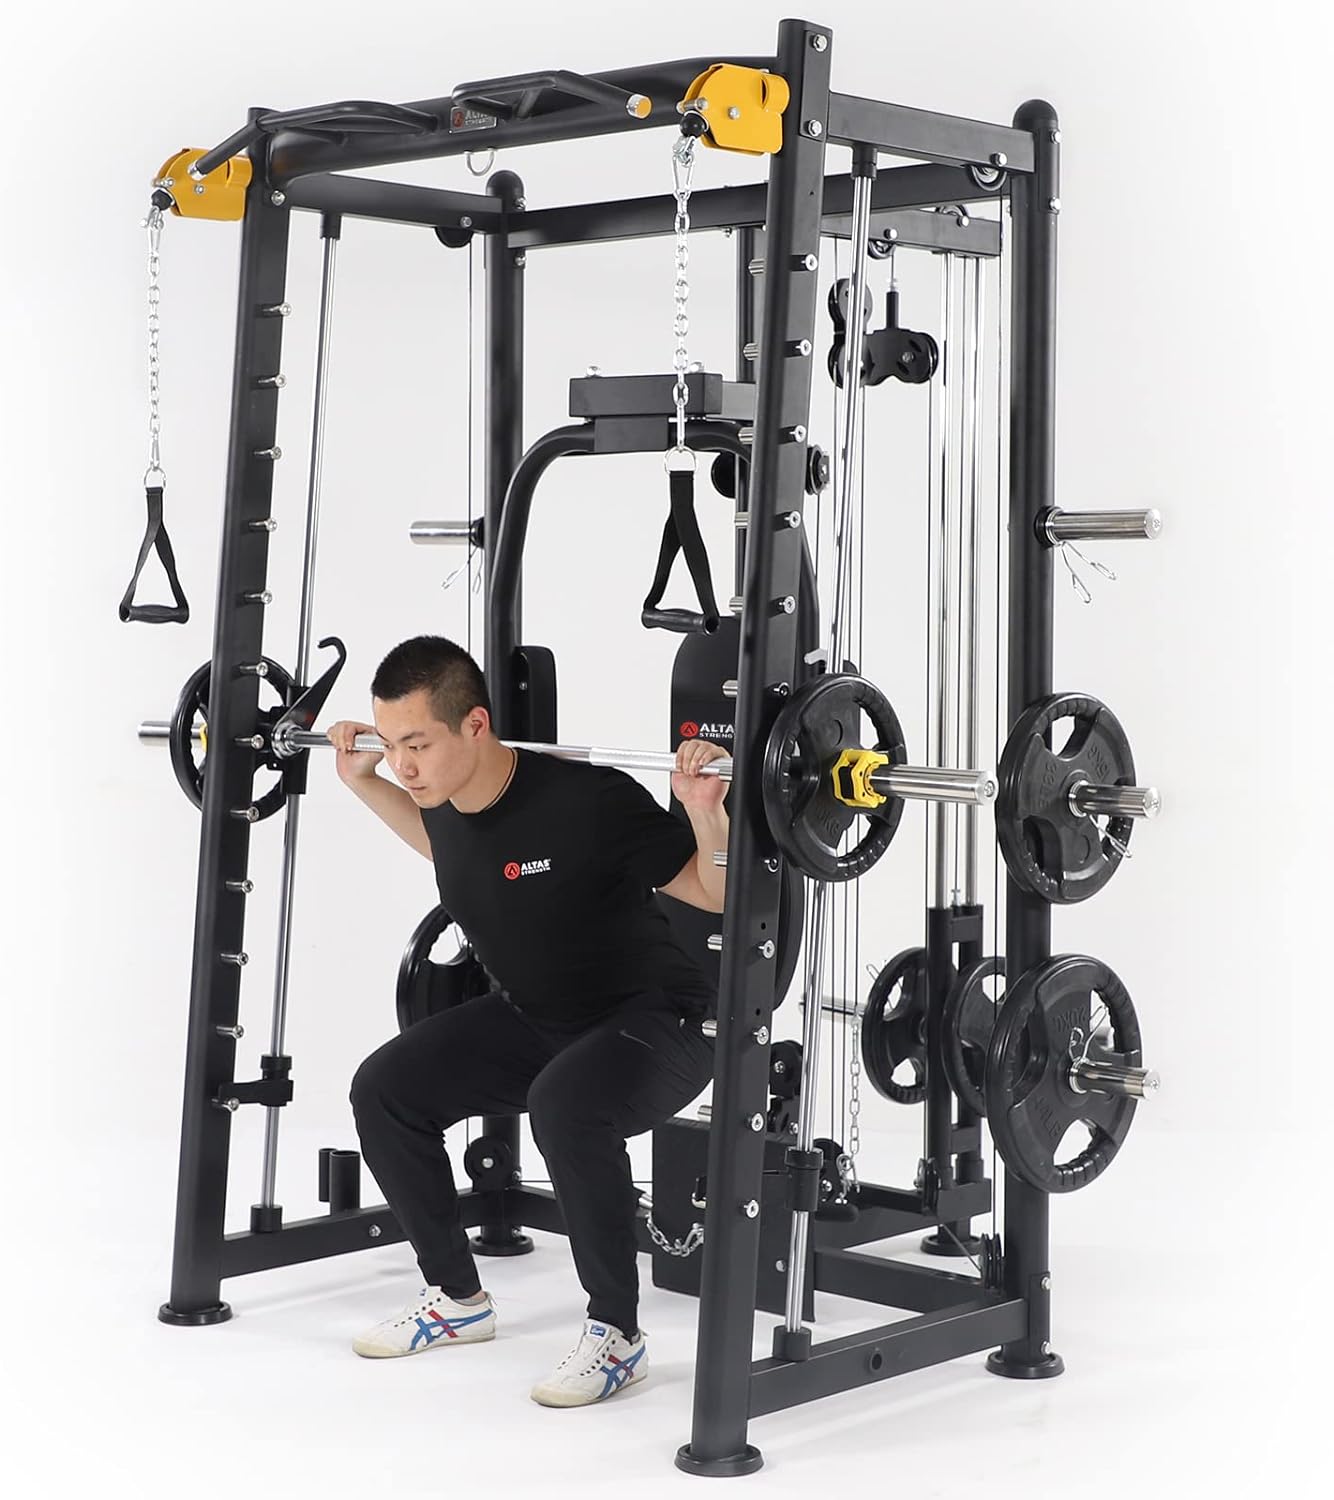 ALTAS STRENGTH Home Gym Equipment Smith Machine with Pulley System Gym Squat Rack Pull Up Bar Upper Body Strength Training Leg Developer Commercial Fitness Equipment Included Accessories 3000